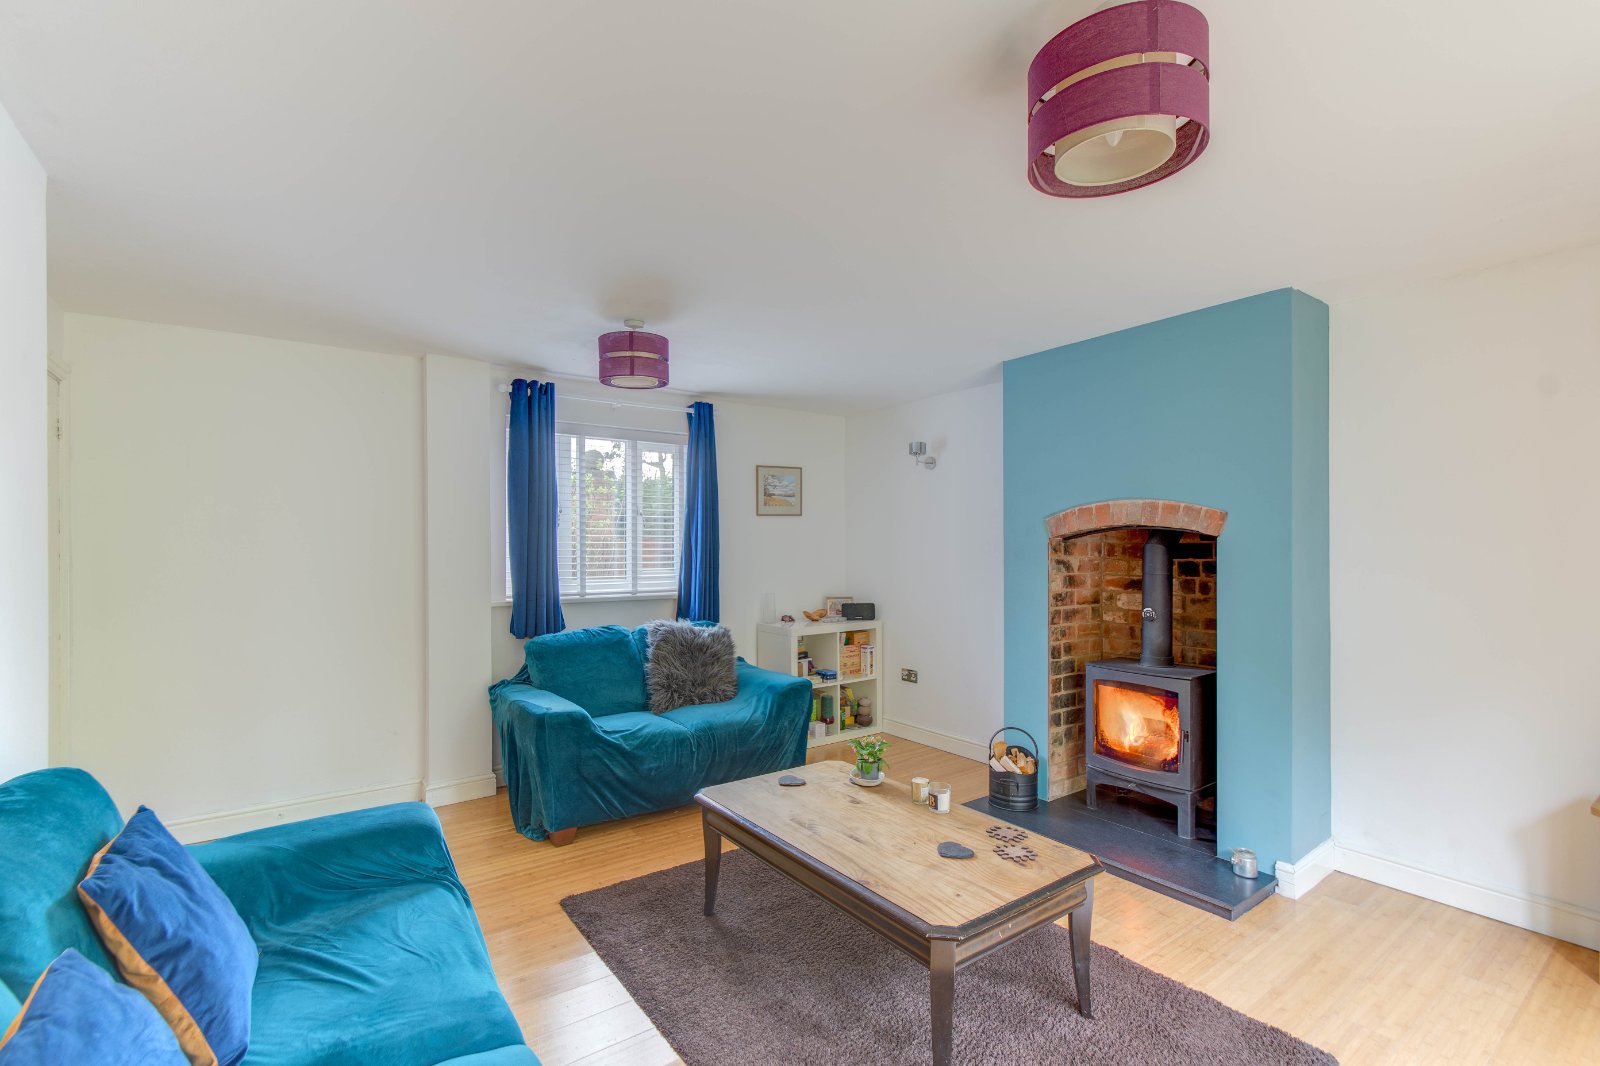 4 bed  for sale in Linthurst Road, Barnt Green 19